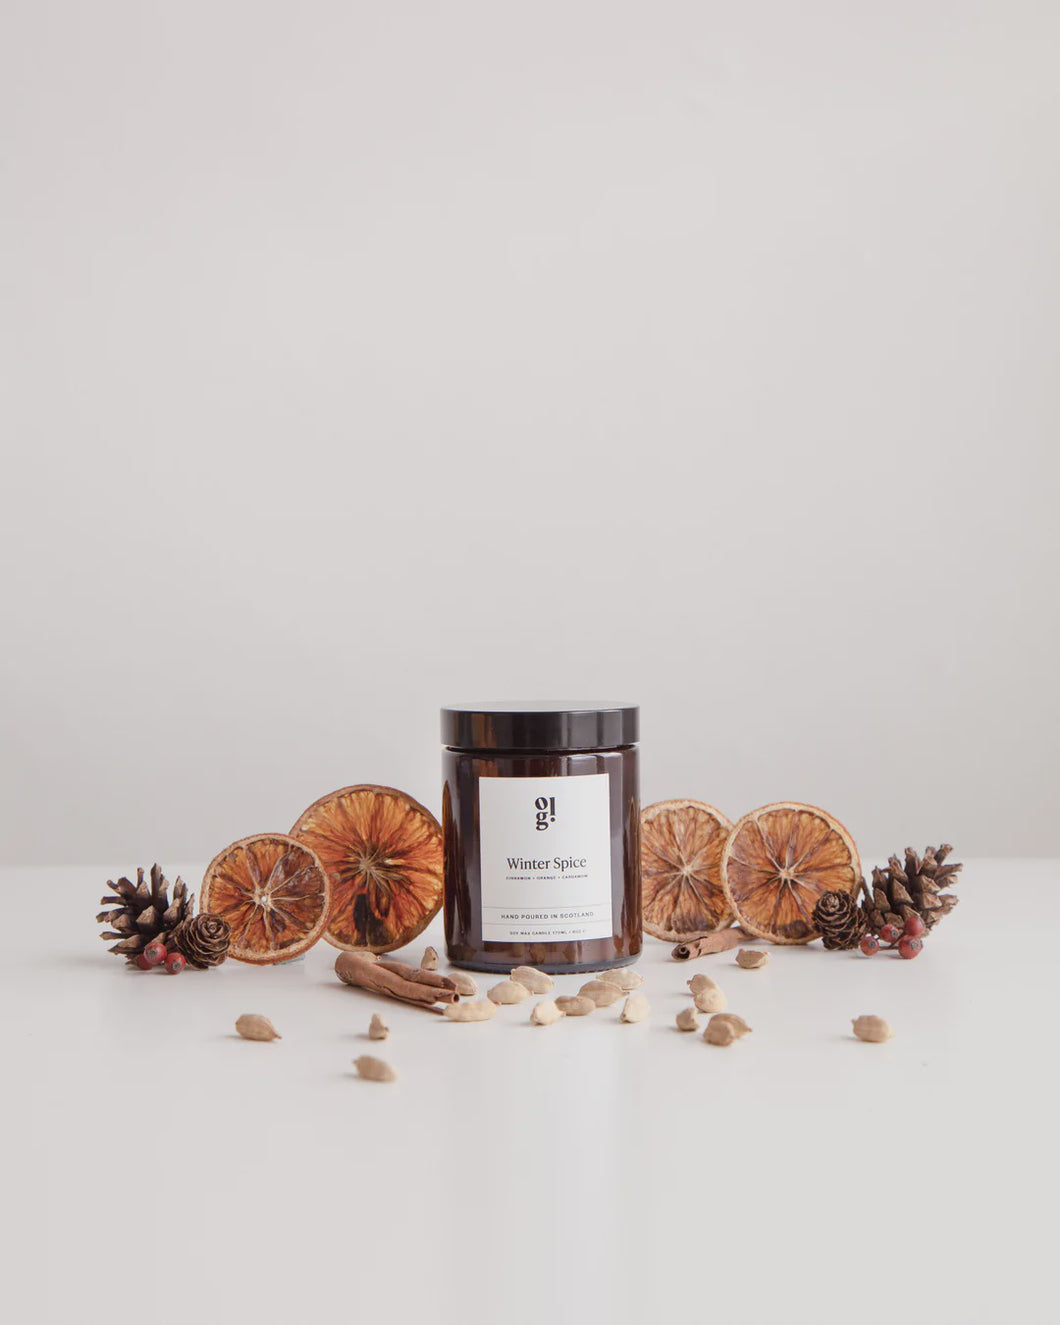 Our Lovely Goods Winter Spice Scented Candle